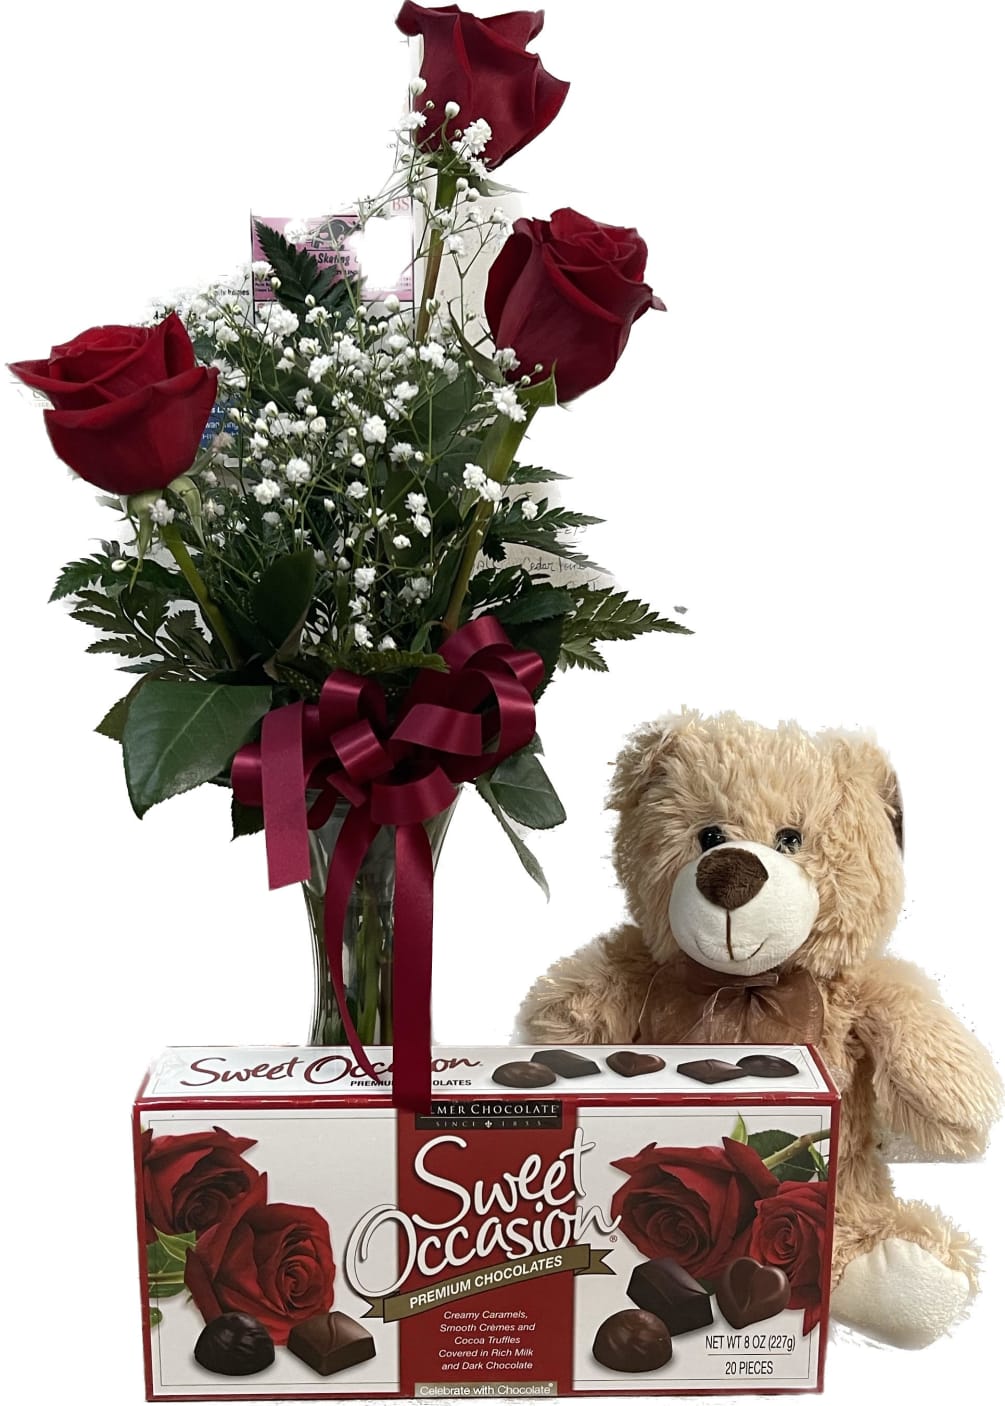 Bear, Chocolates, &amp; Roses combo.
If you would like other color than red